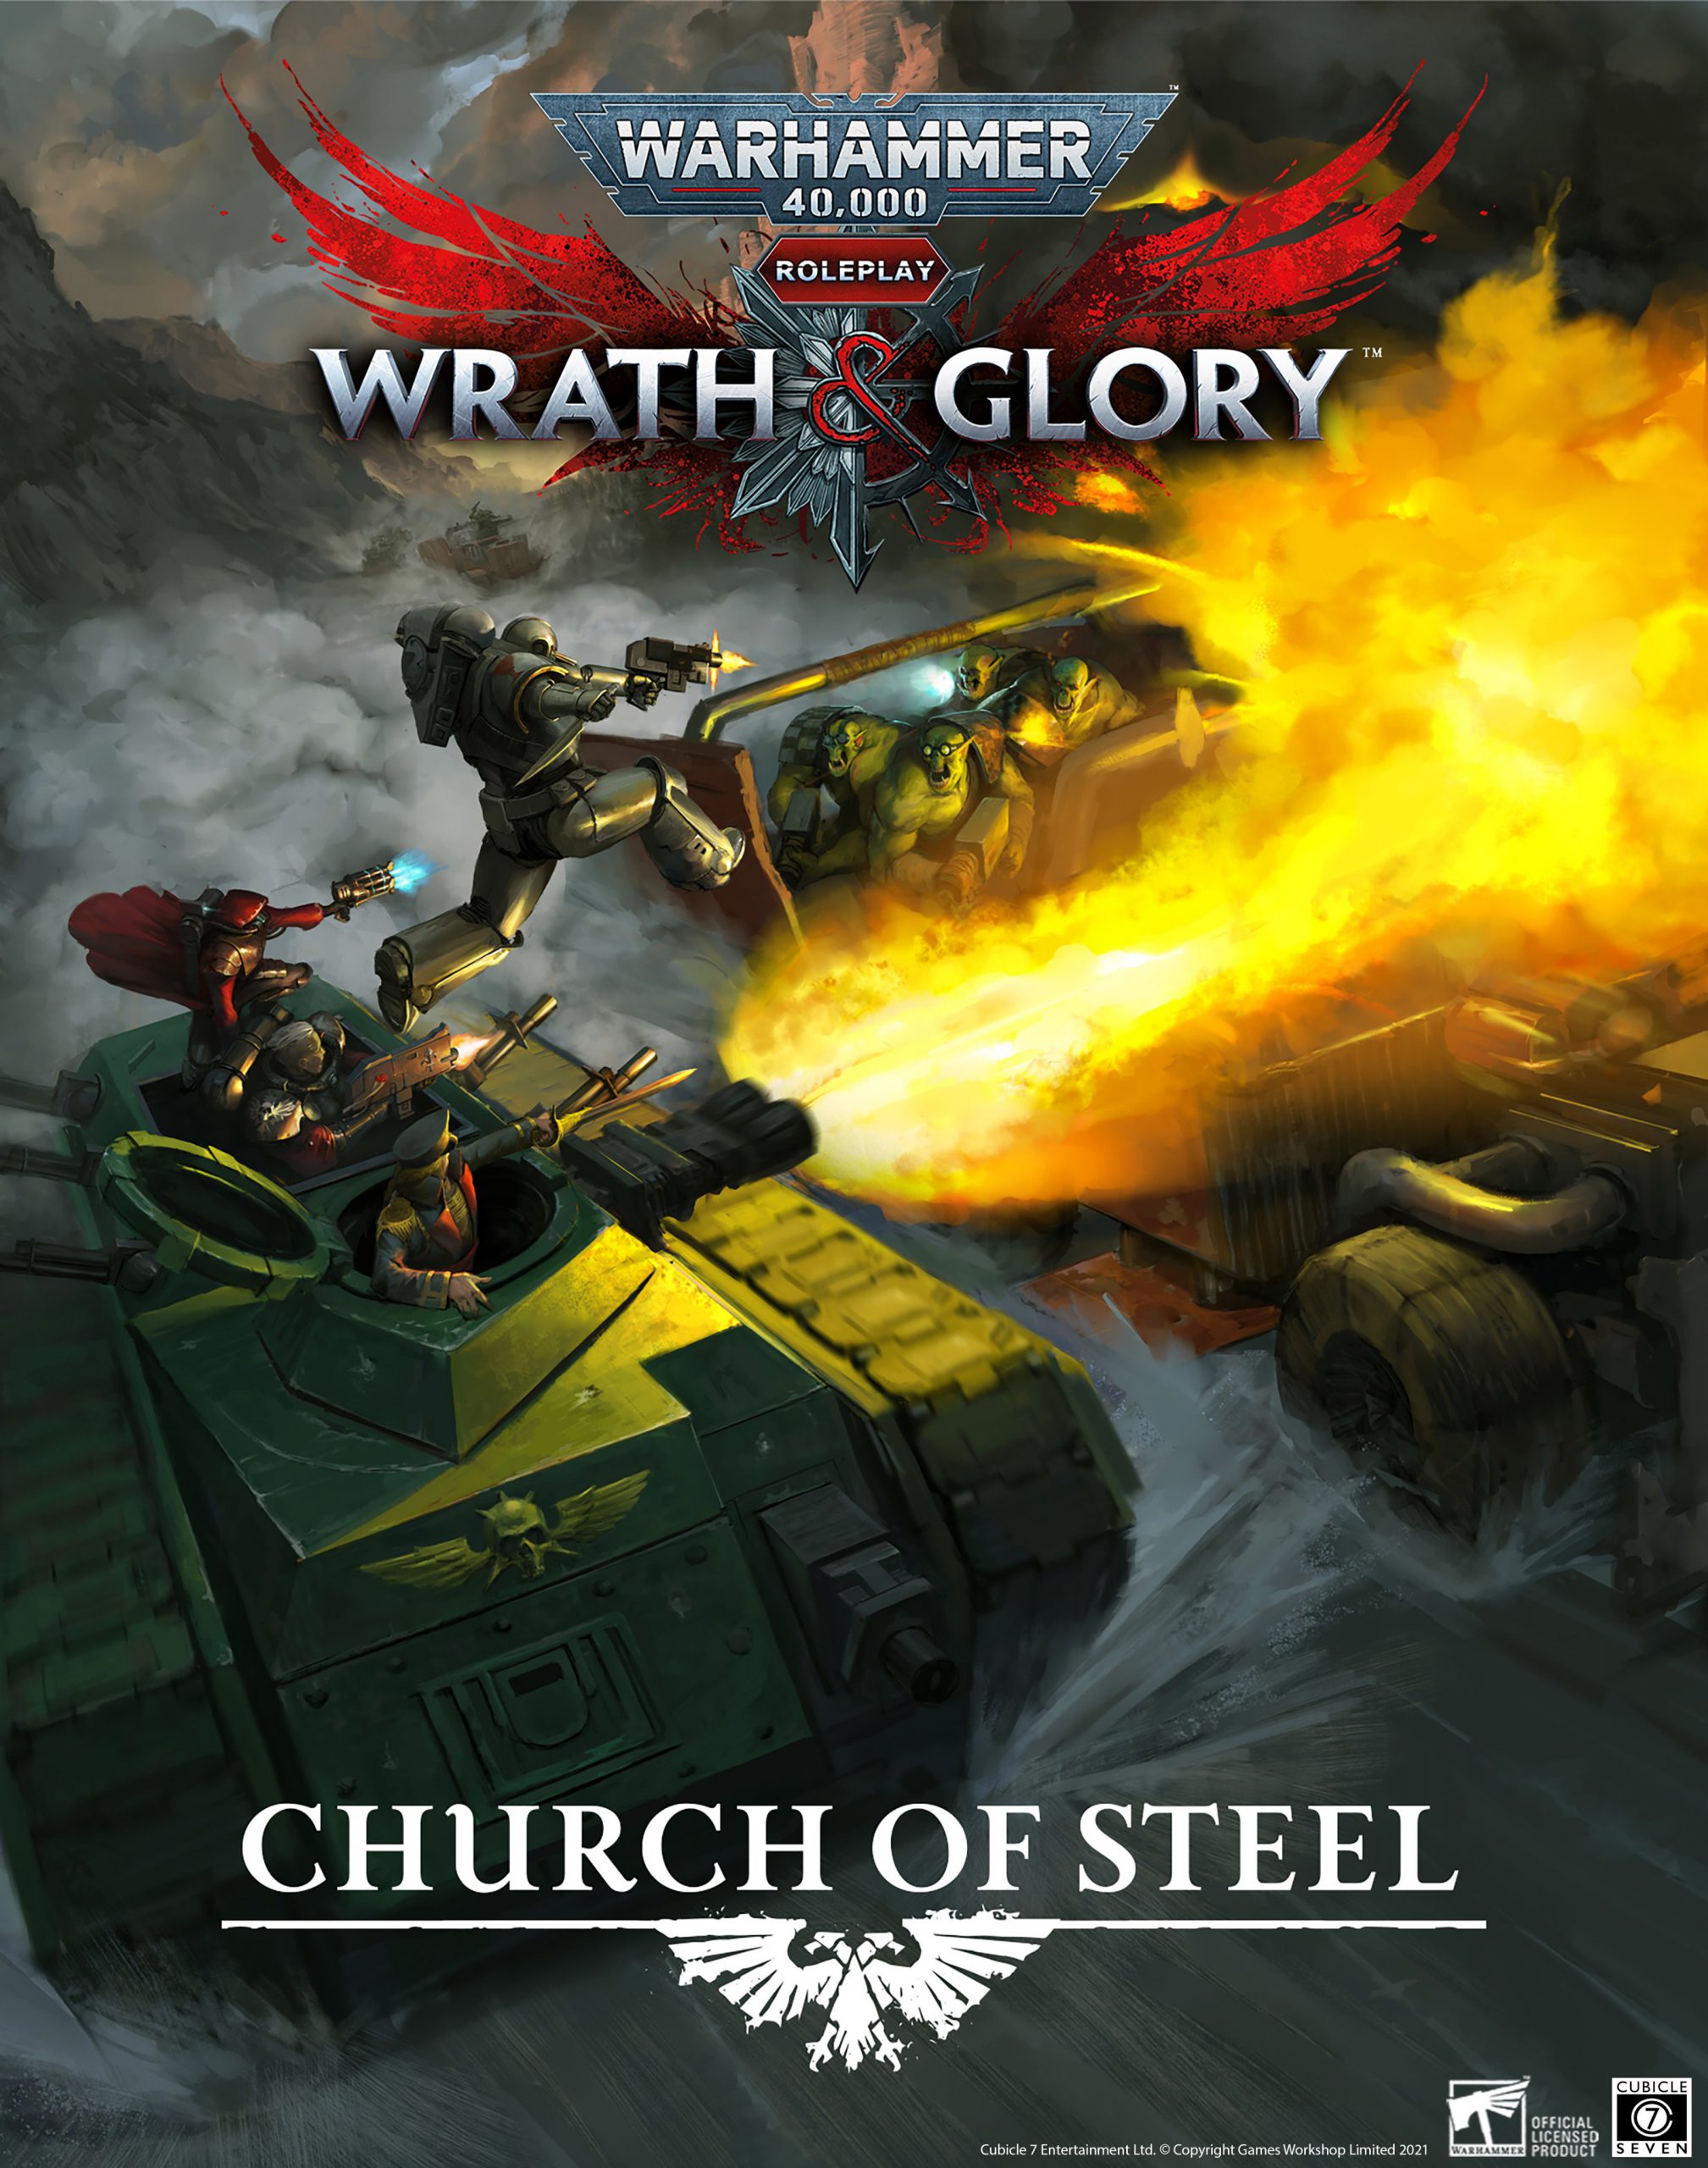 Coming Soon - Church of Steel for Wrath & Glory